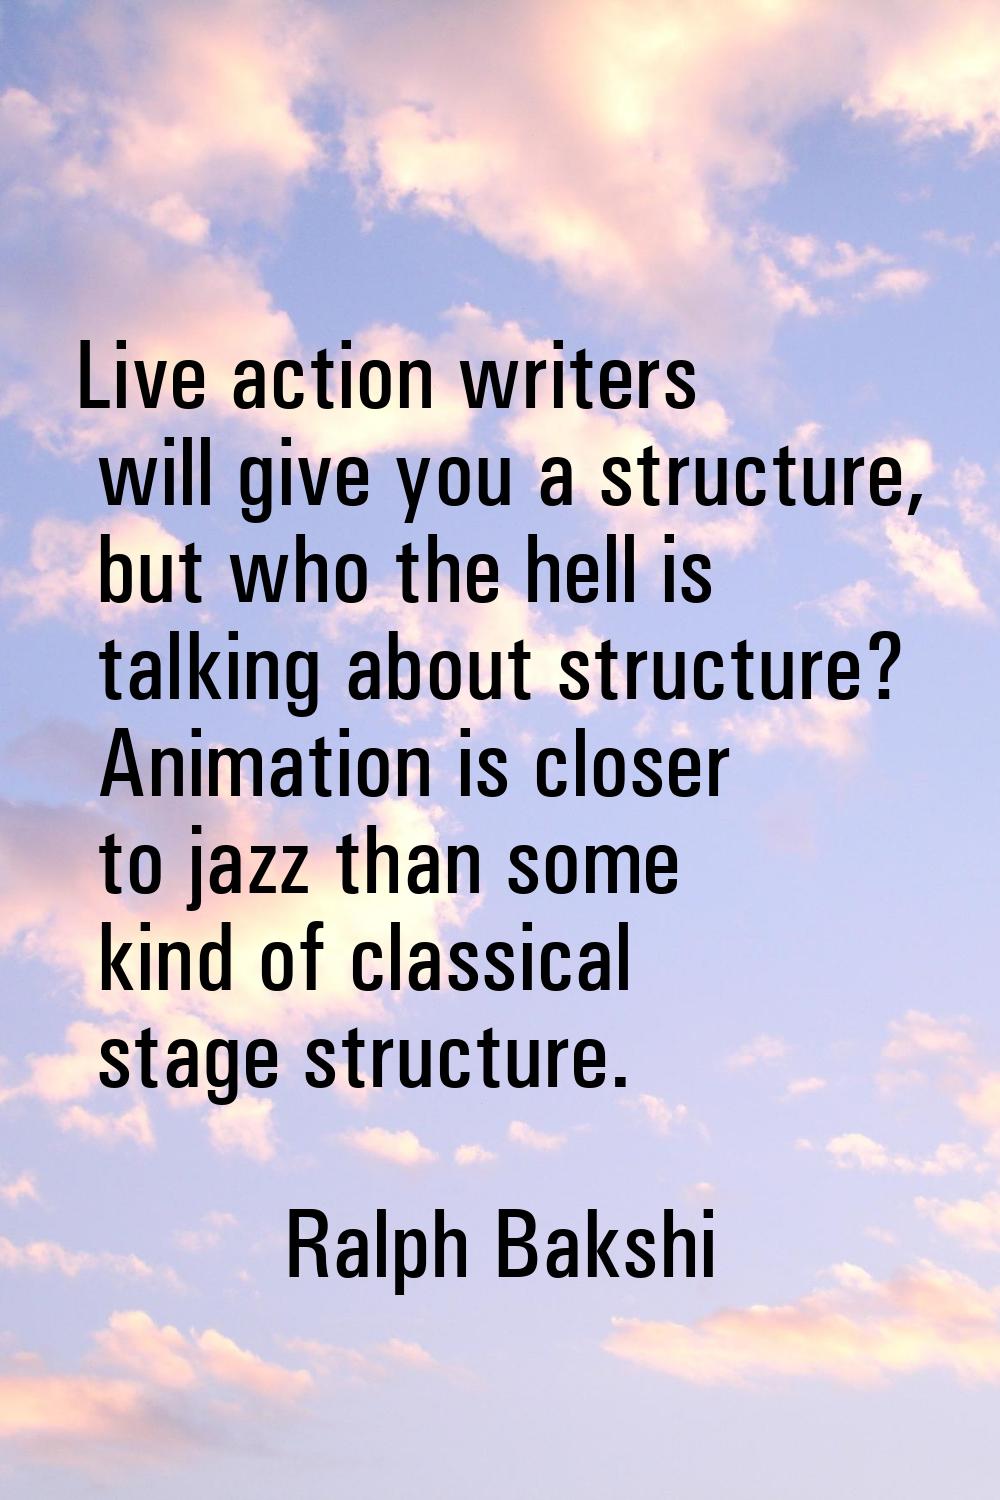 Live action writers will give you a structure, but who the hell is talking about structure? Animati